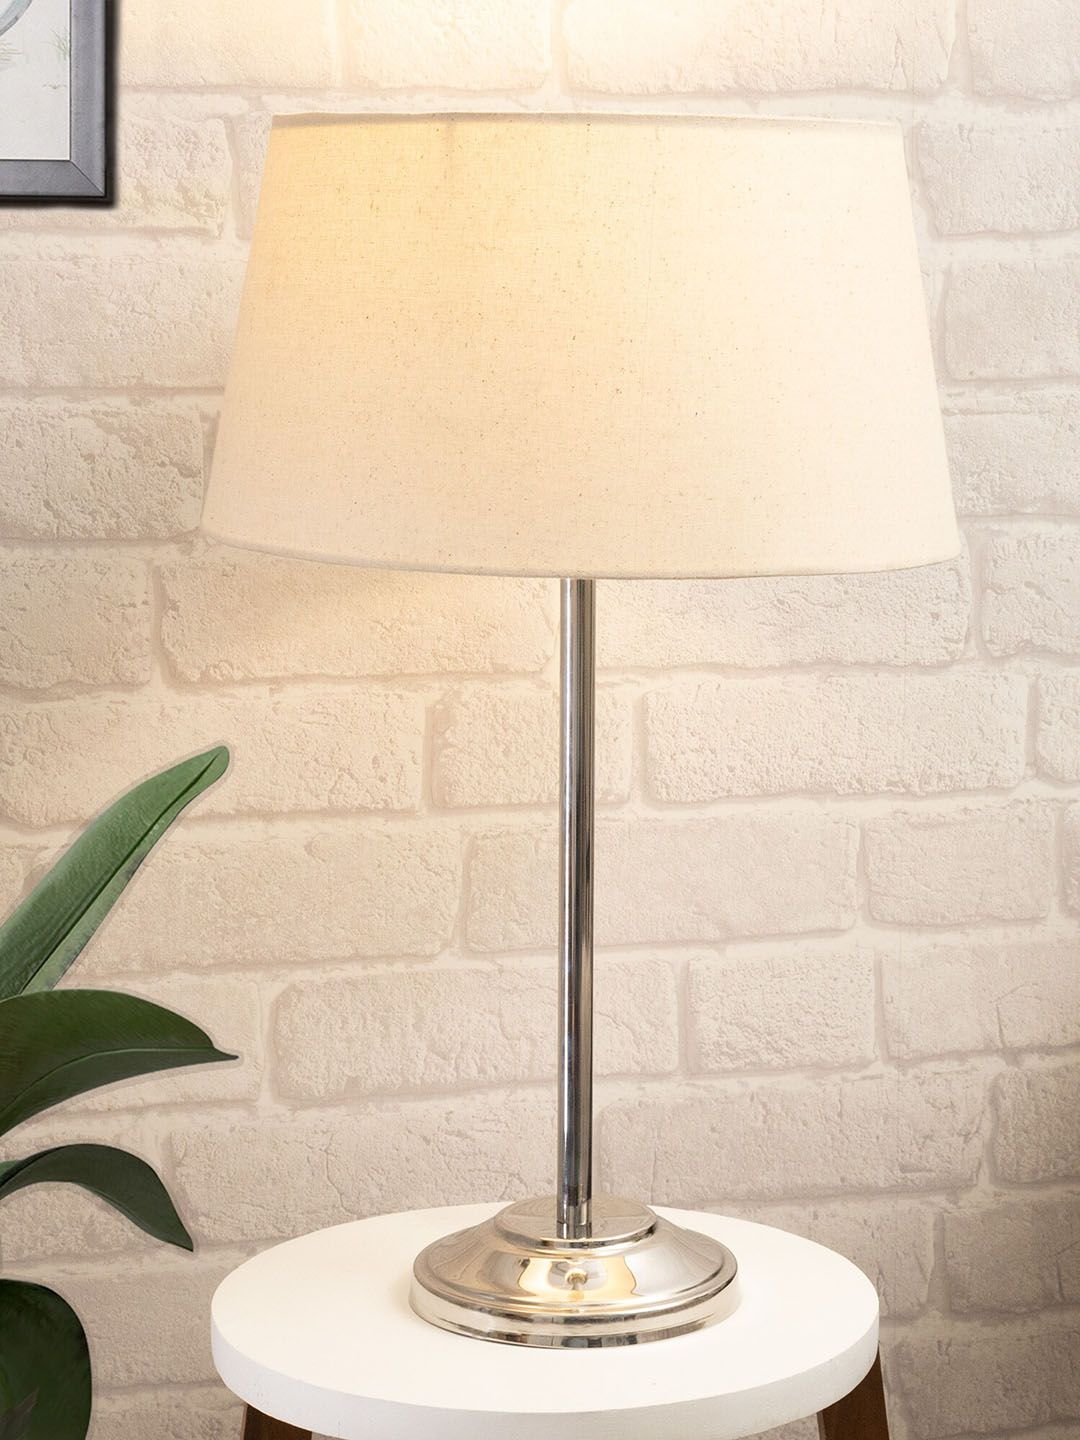 Homesake Beige & Steel Solid Table Lamp with Fabric Shade Price in India